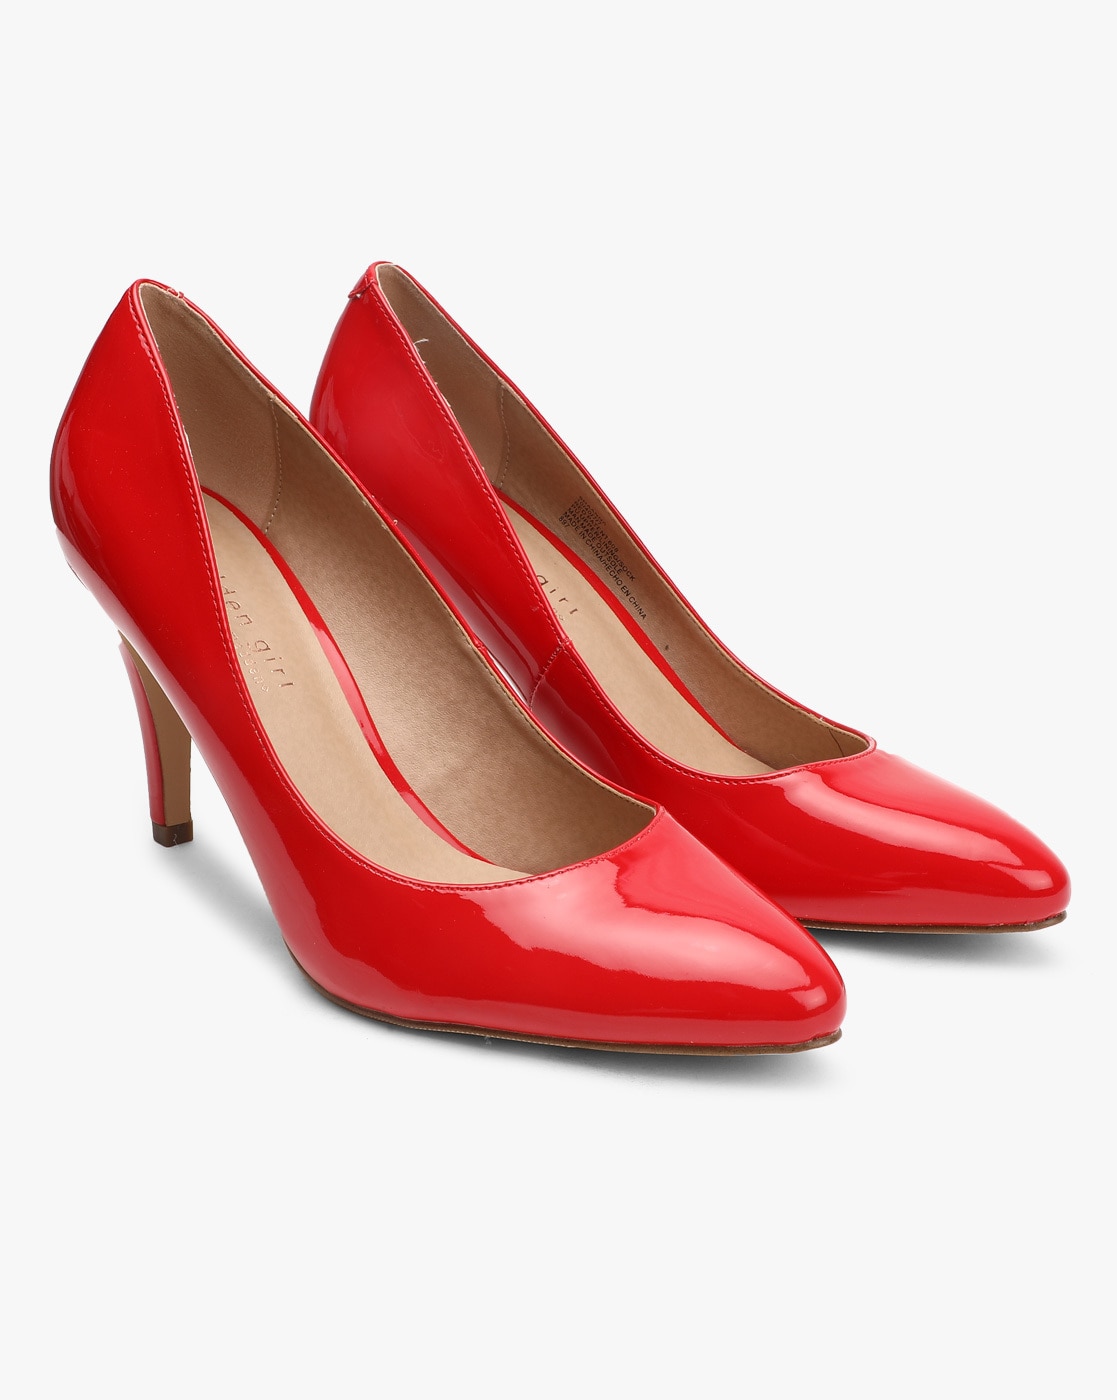 madden girl red pumps